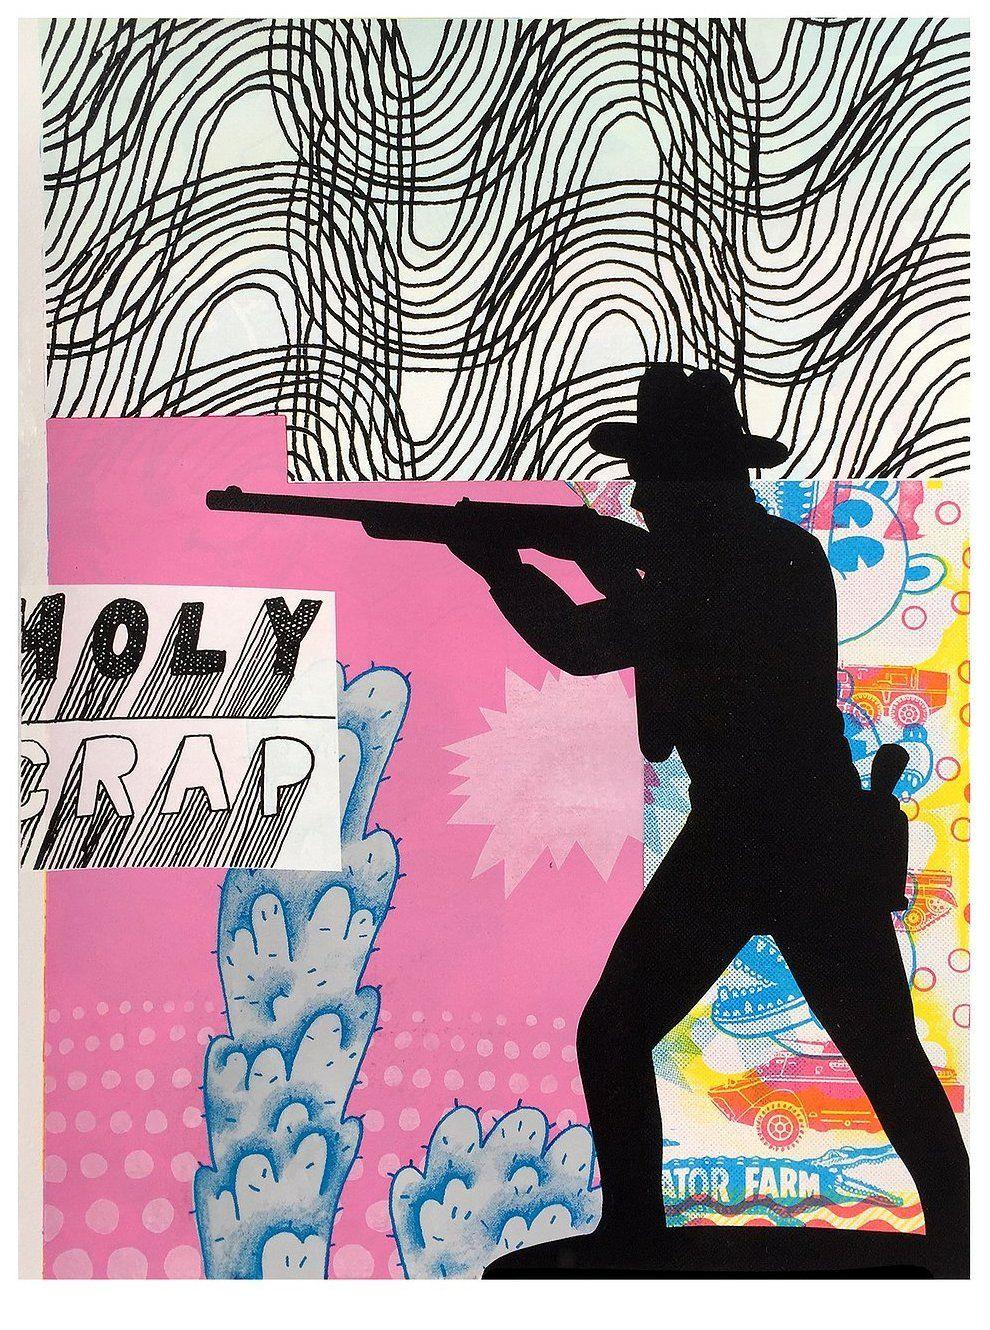 Chadwick Tolley Abstract Print - Holy Crap (3/10)